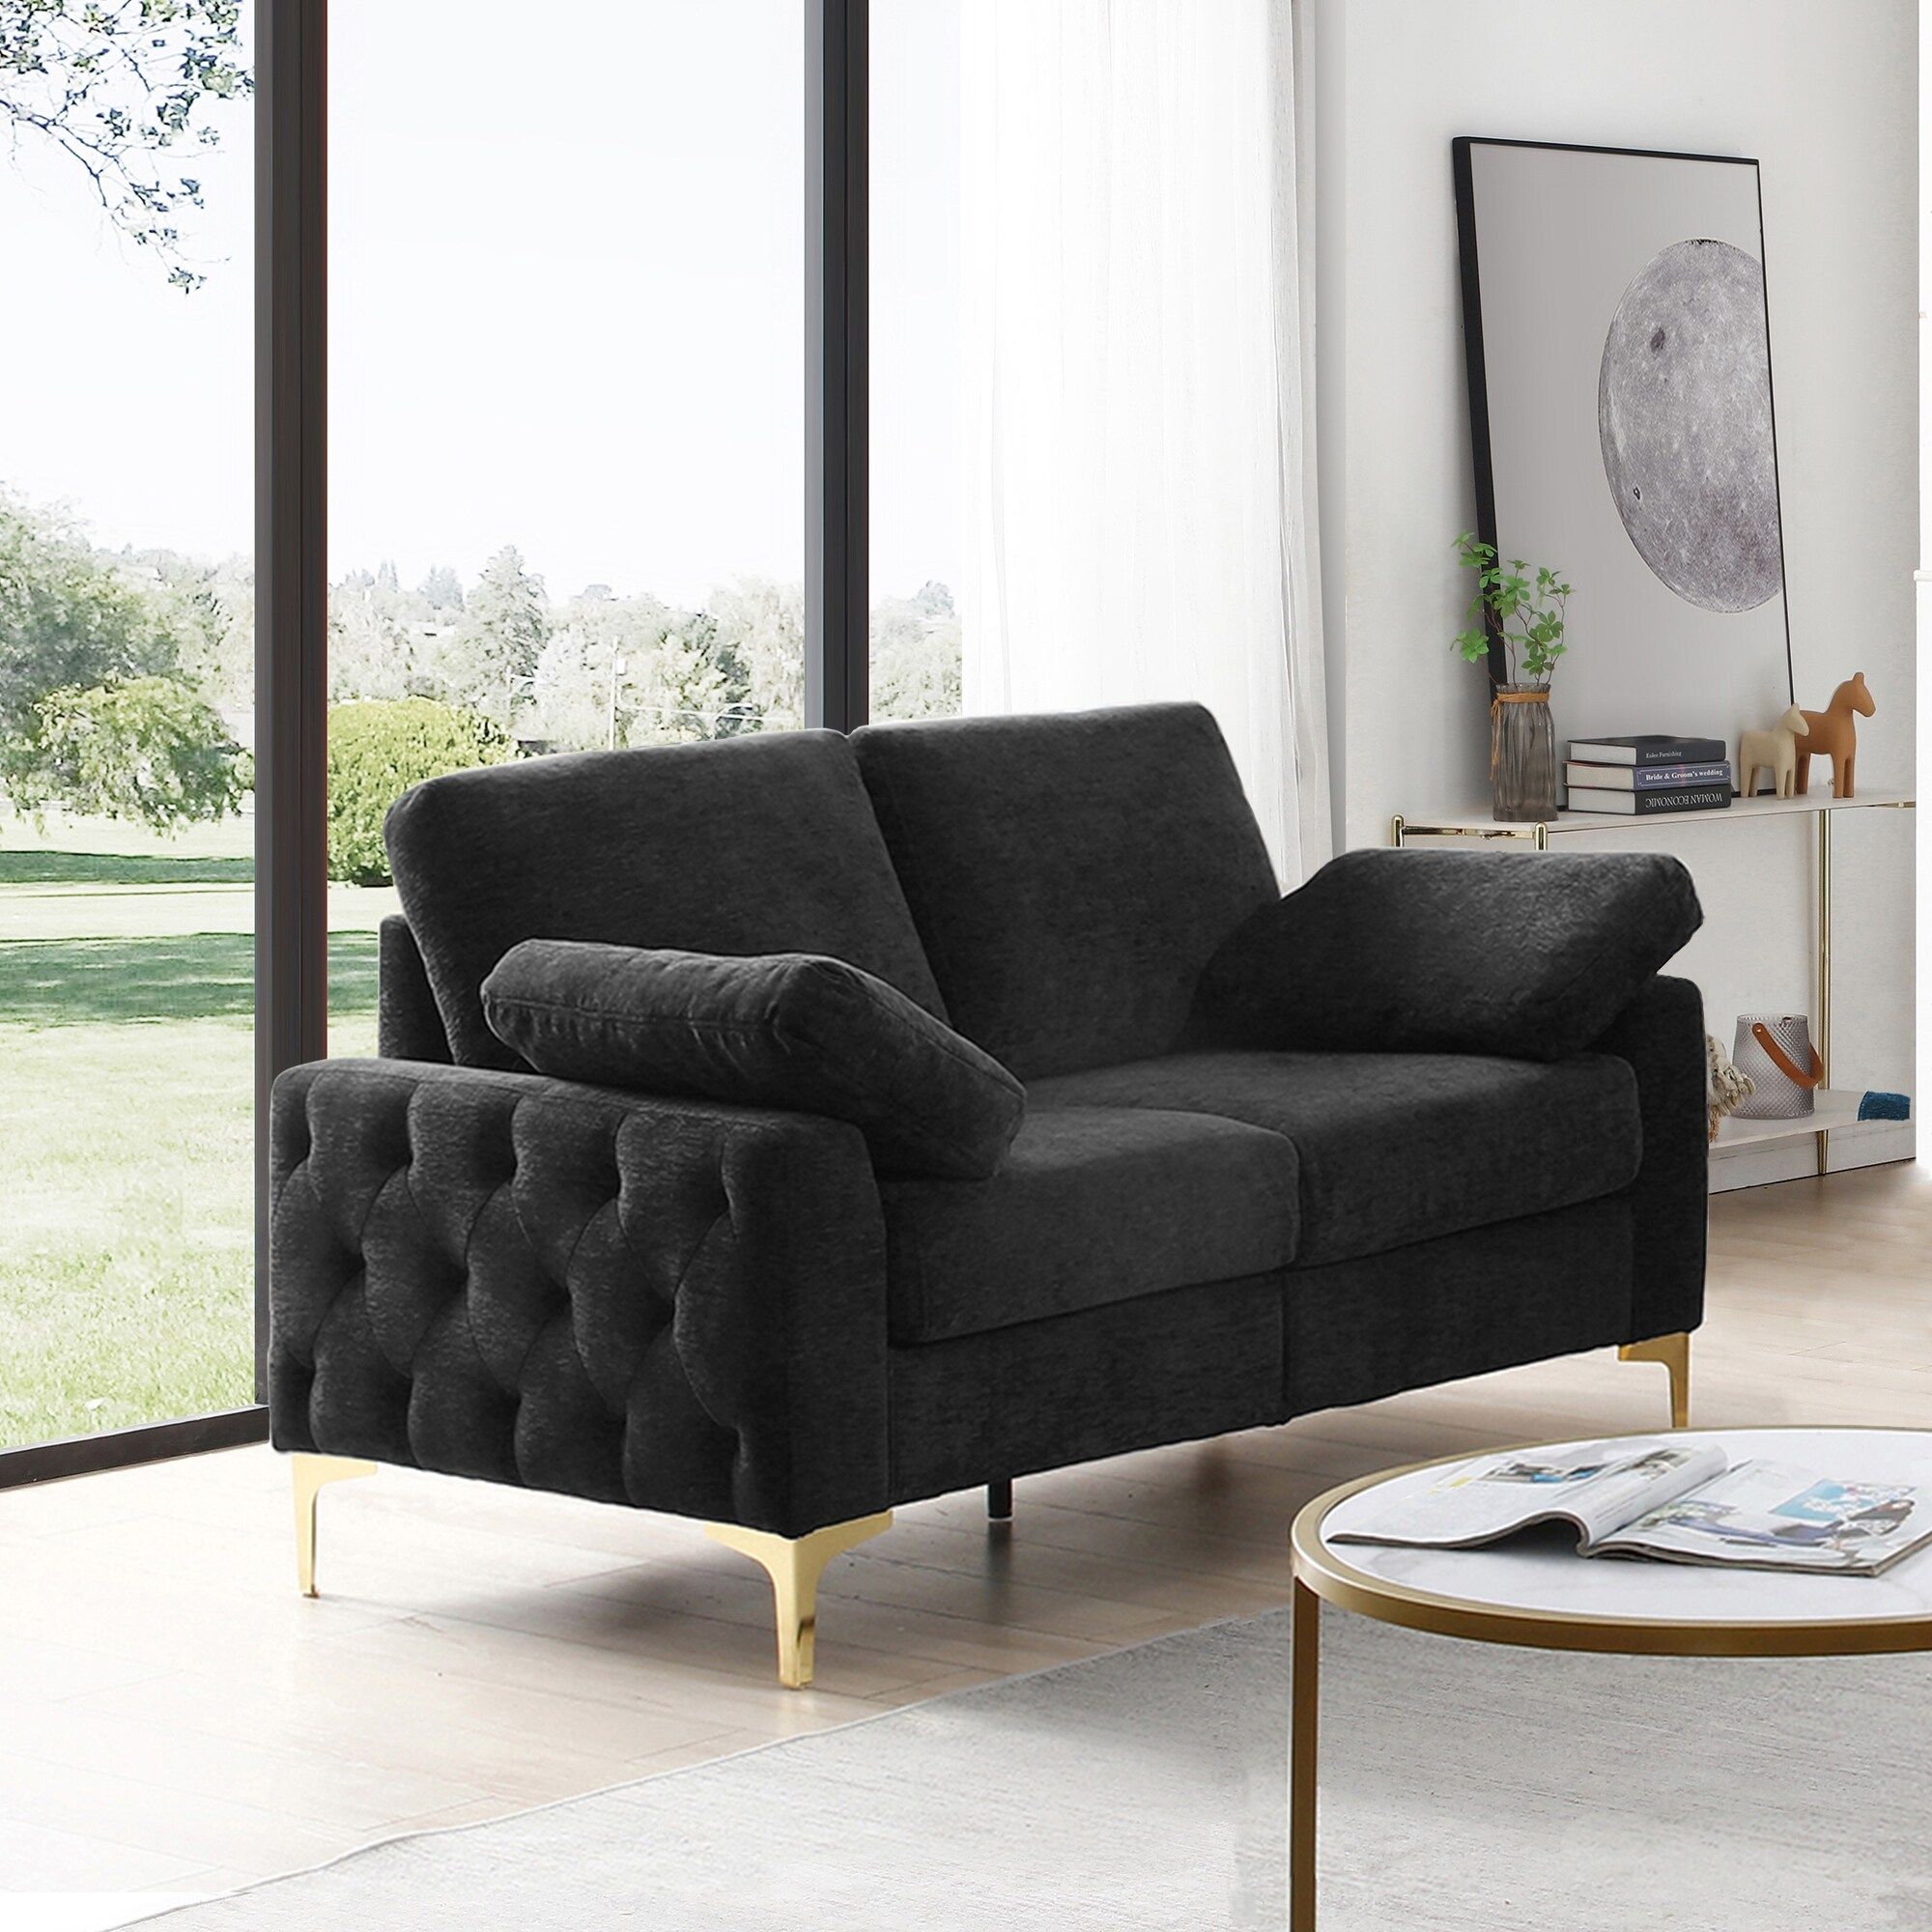 Tufted 2 Seater Couch Chenille Fabric Upholstered Loveseat Sofas Removable  Cushions Sofa With 2 Arm Pillows And Metal Legs – Bed Bath & Beyond –  38046946 Regarding 2 Seater Black Velvet Sofa Beds (View 3 of 15)